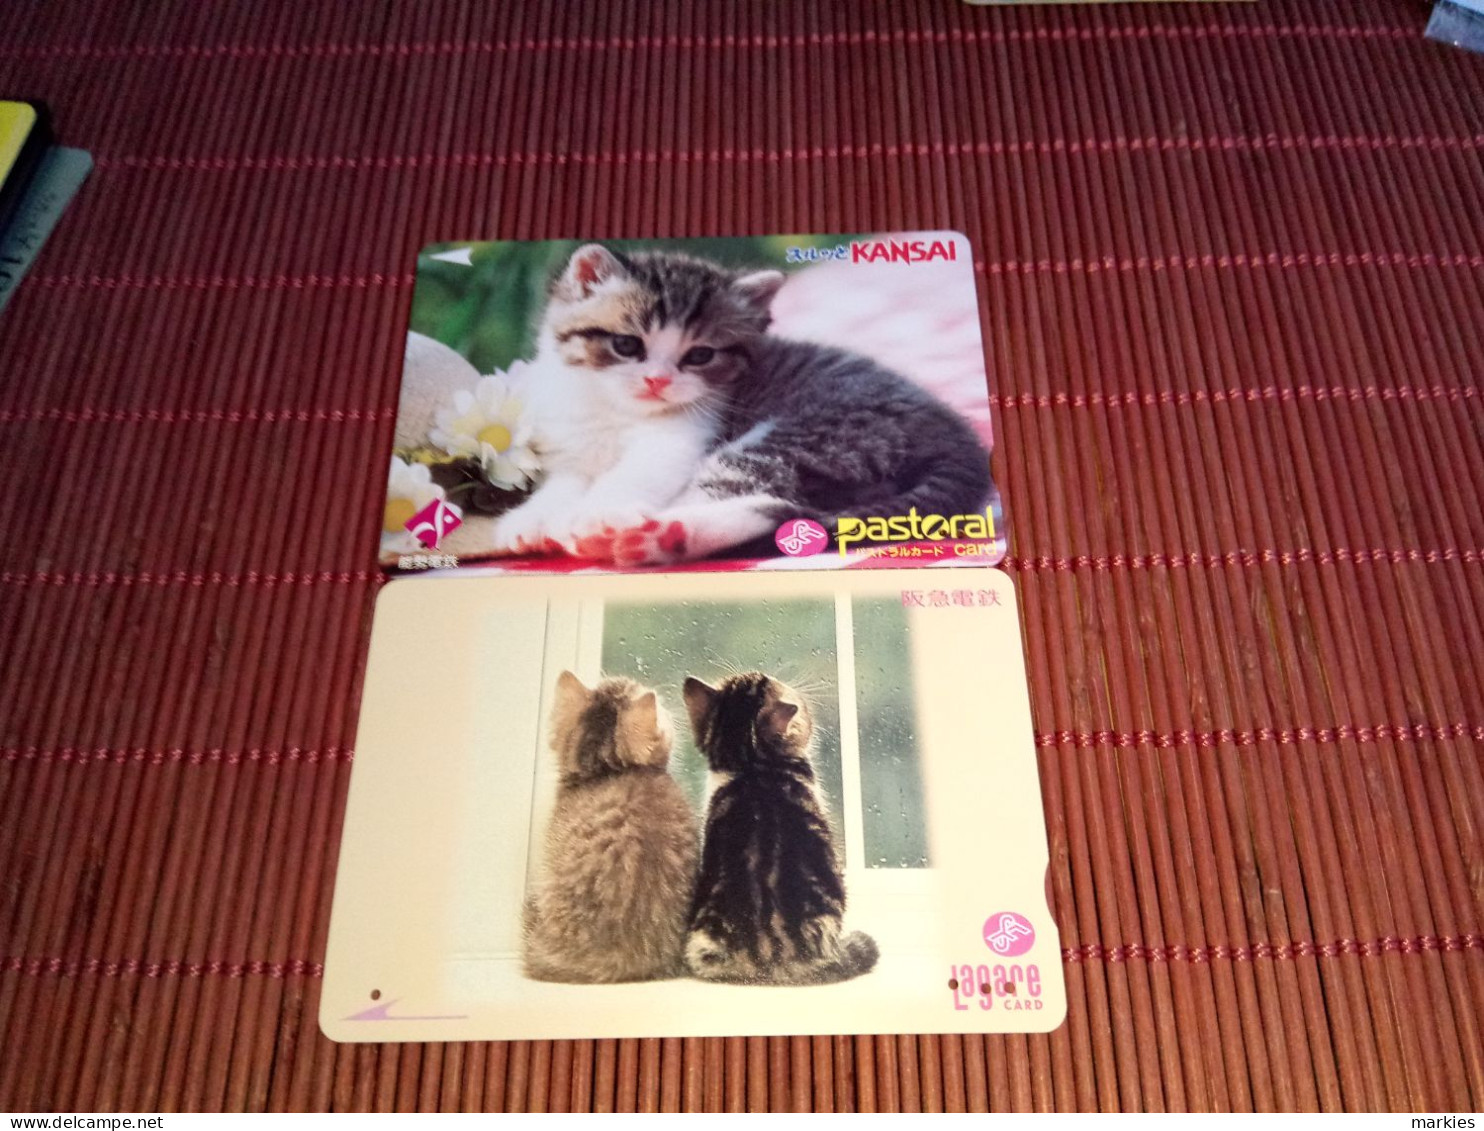 Cats 2 Nice Metrocards Used Rare - Chats